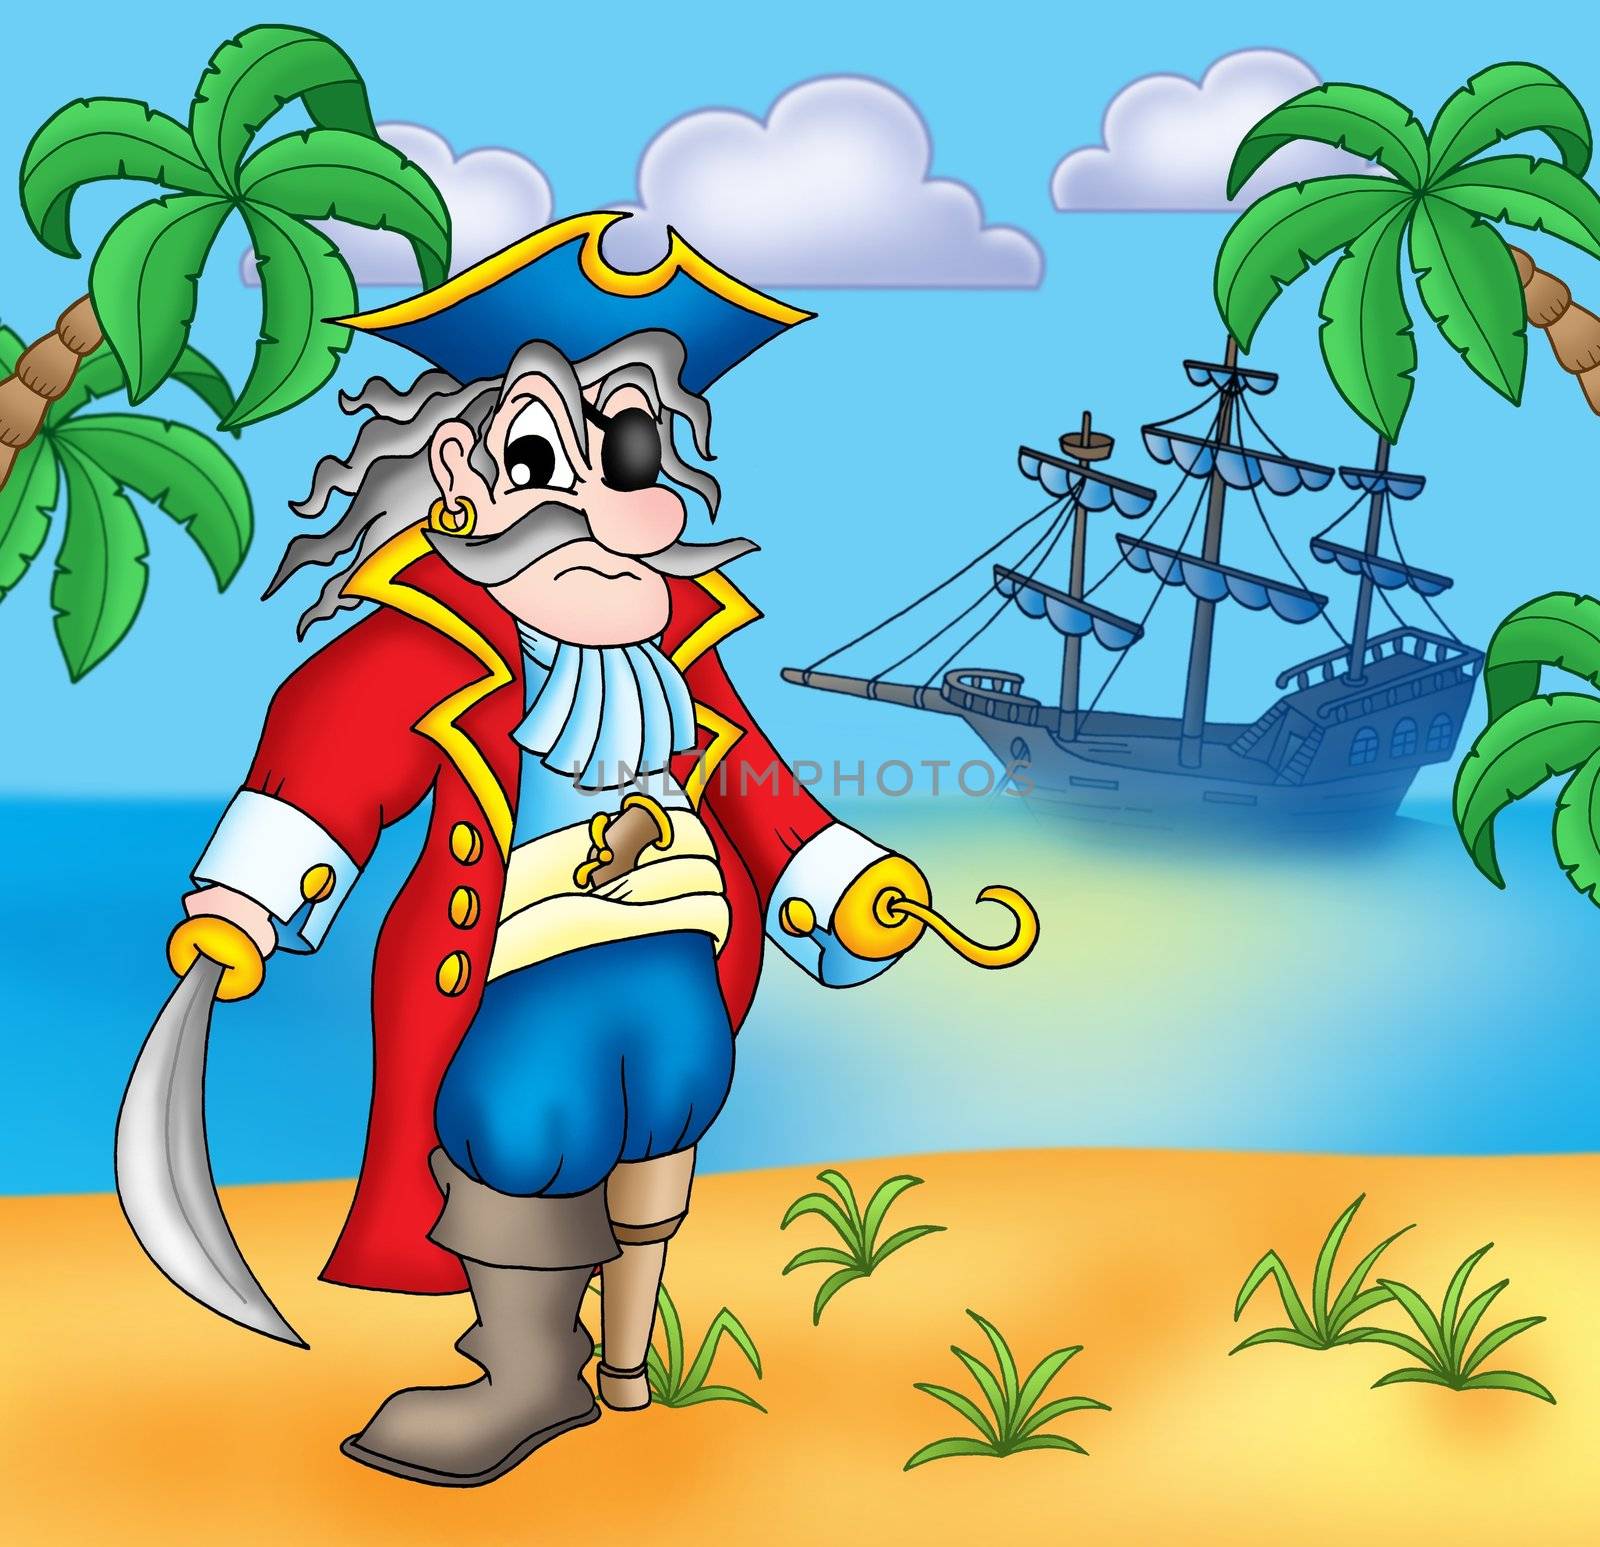 Old pirate on beach - color illustration.